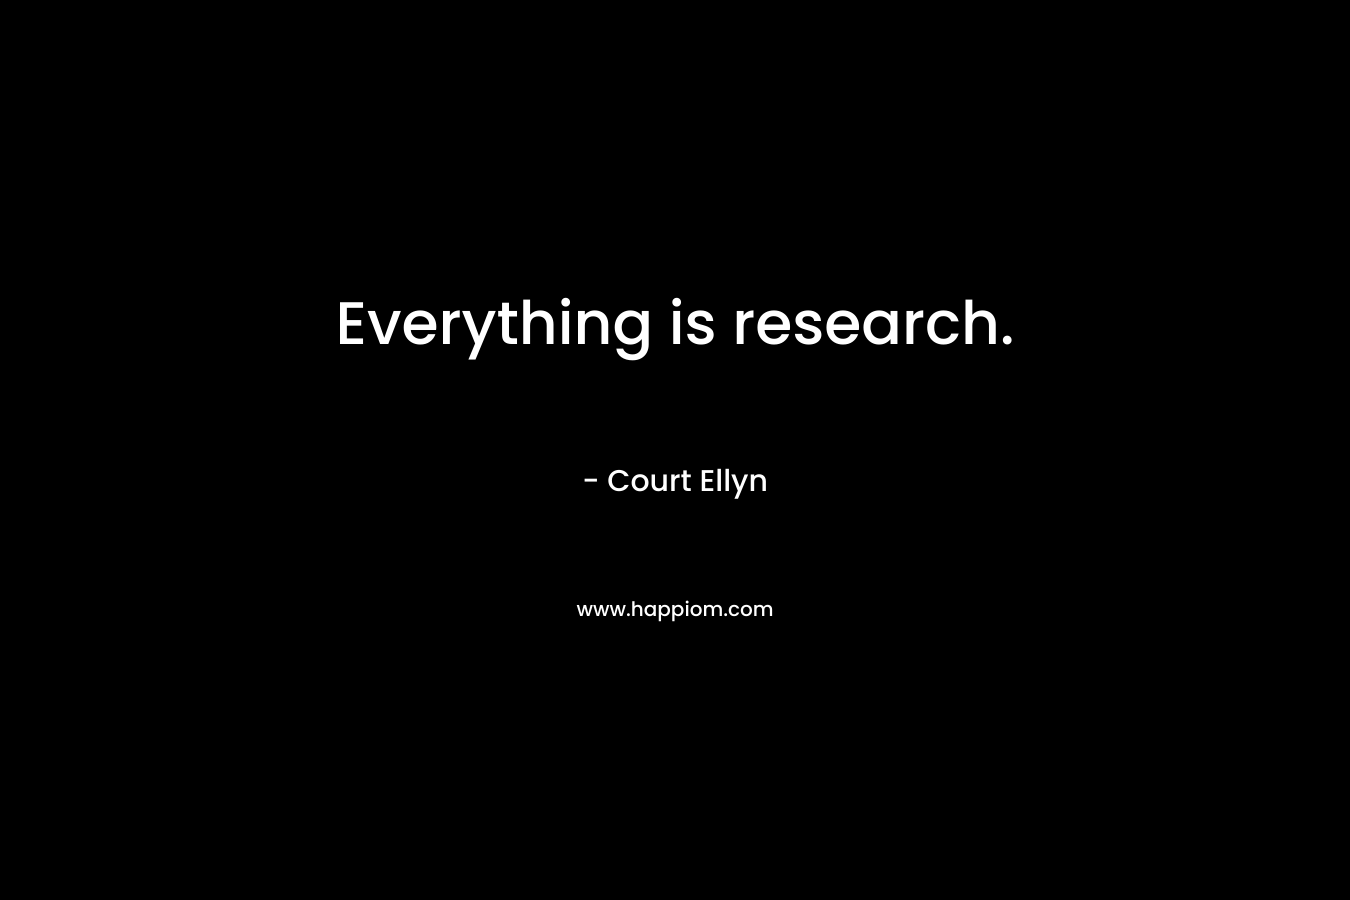 Everything is research.